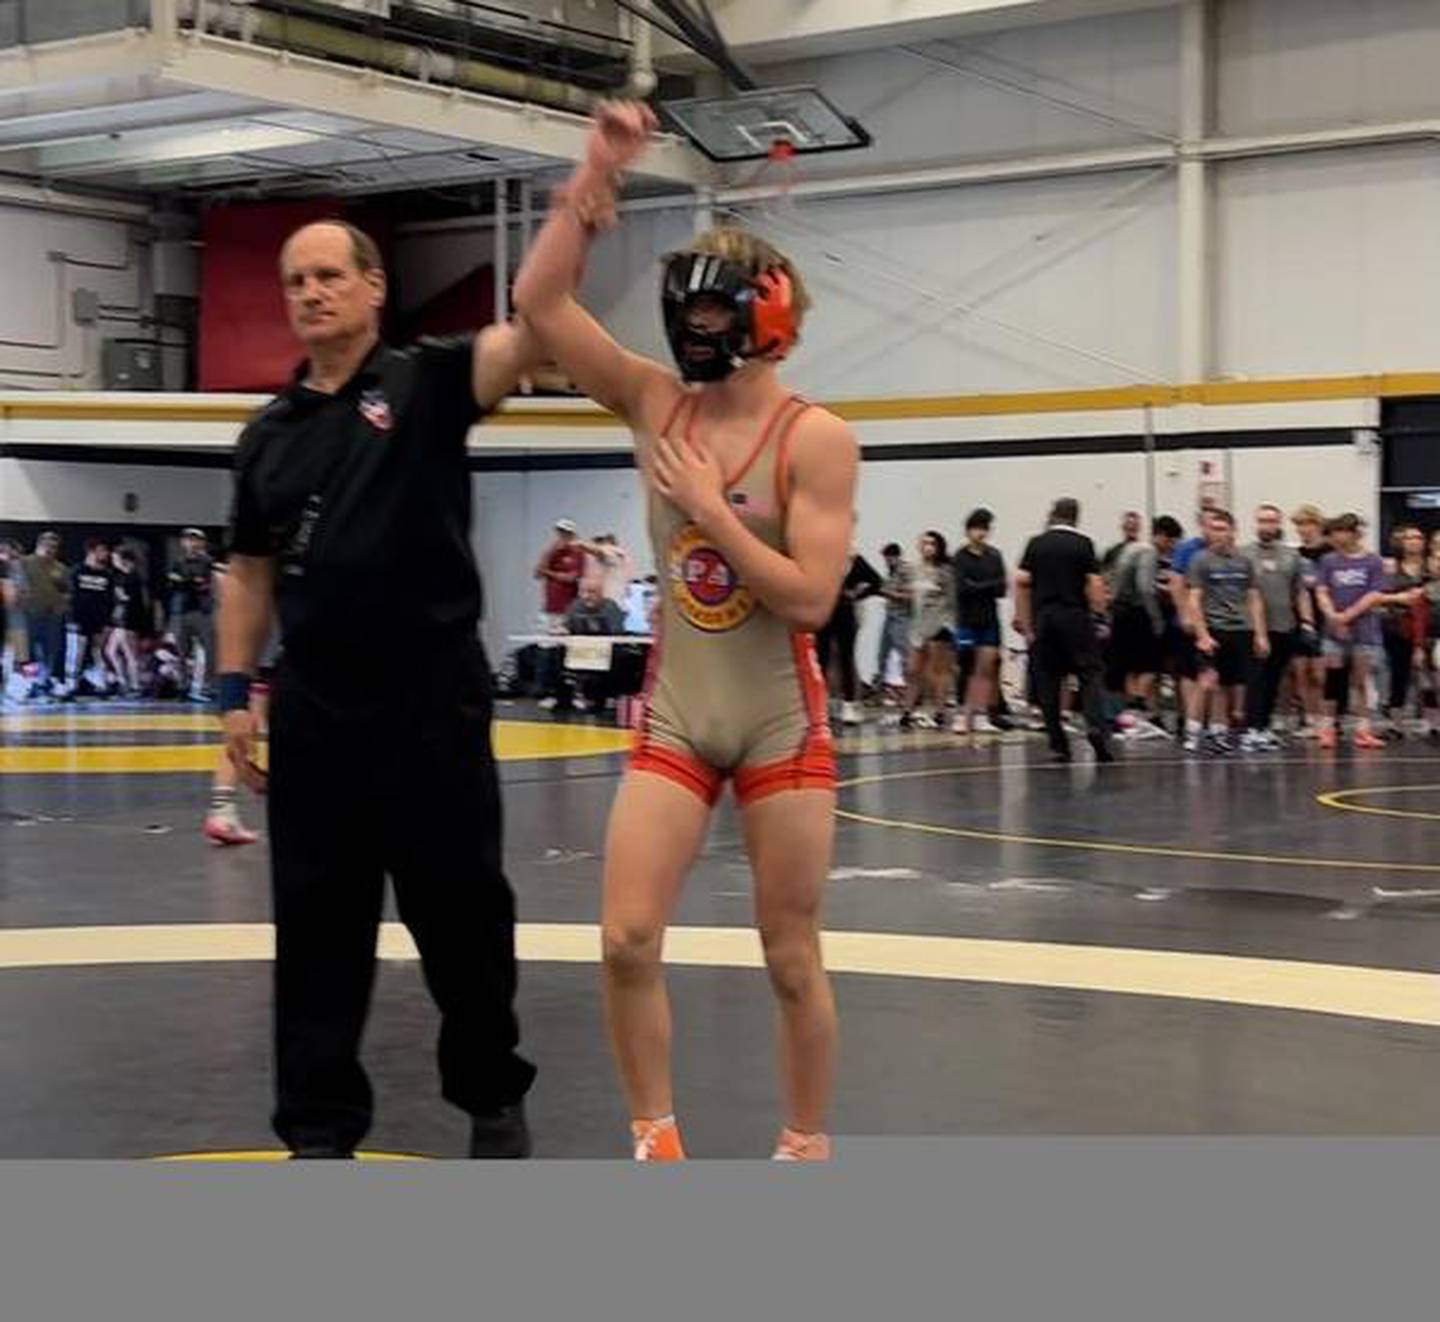 Fourteen-year-old Cooper Corder of Sandwich, who was punched in the face by his opponent following their wrestling match on April 8 at Oak Park-River Forest High School, has returned to the wrestling mat.